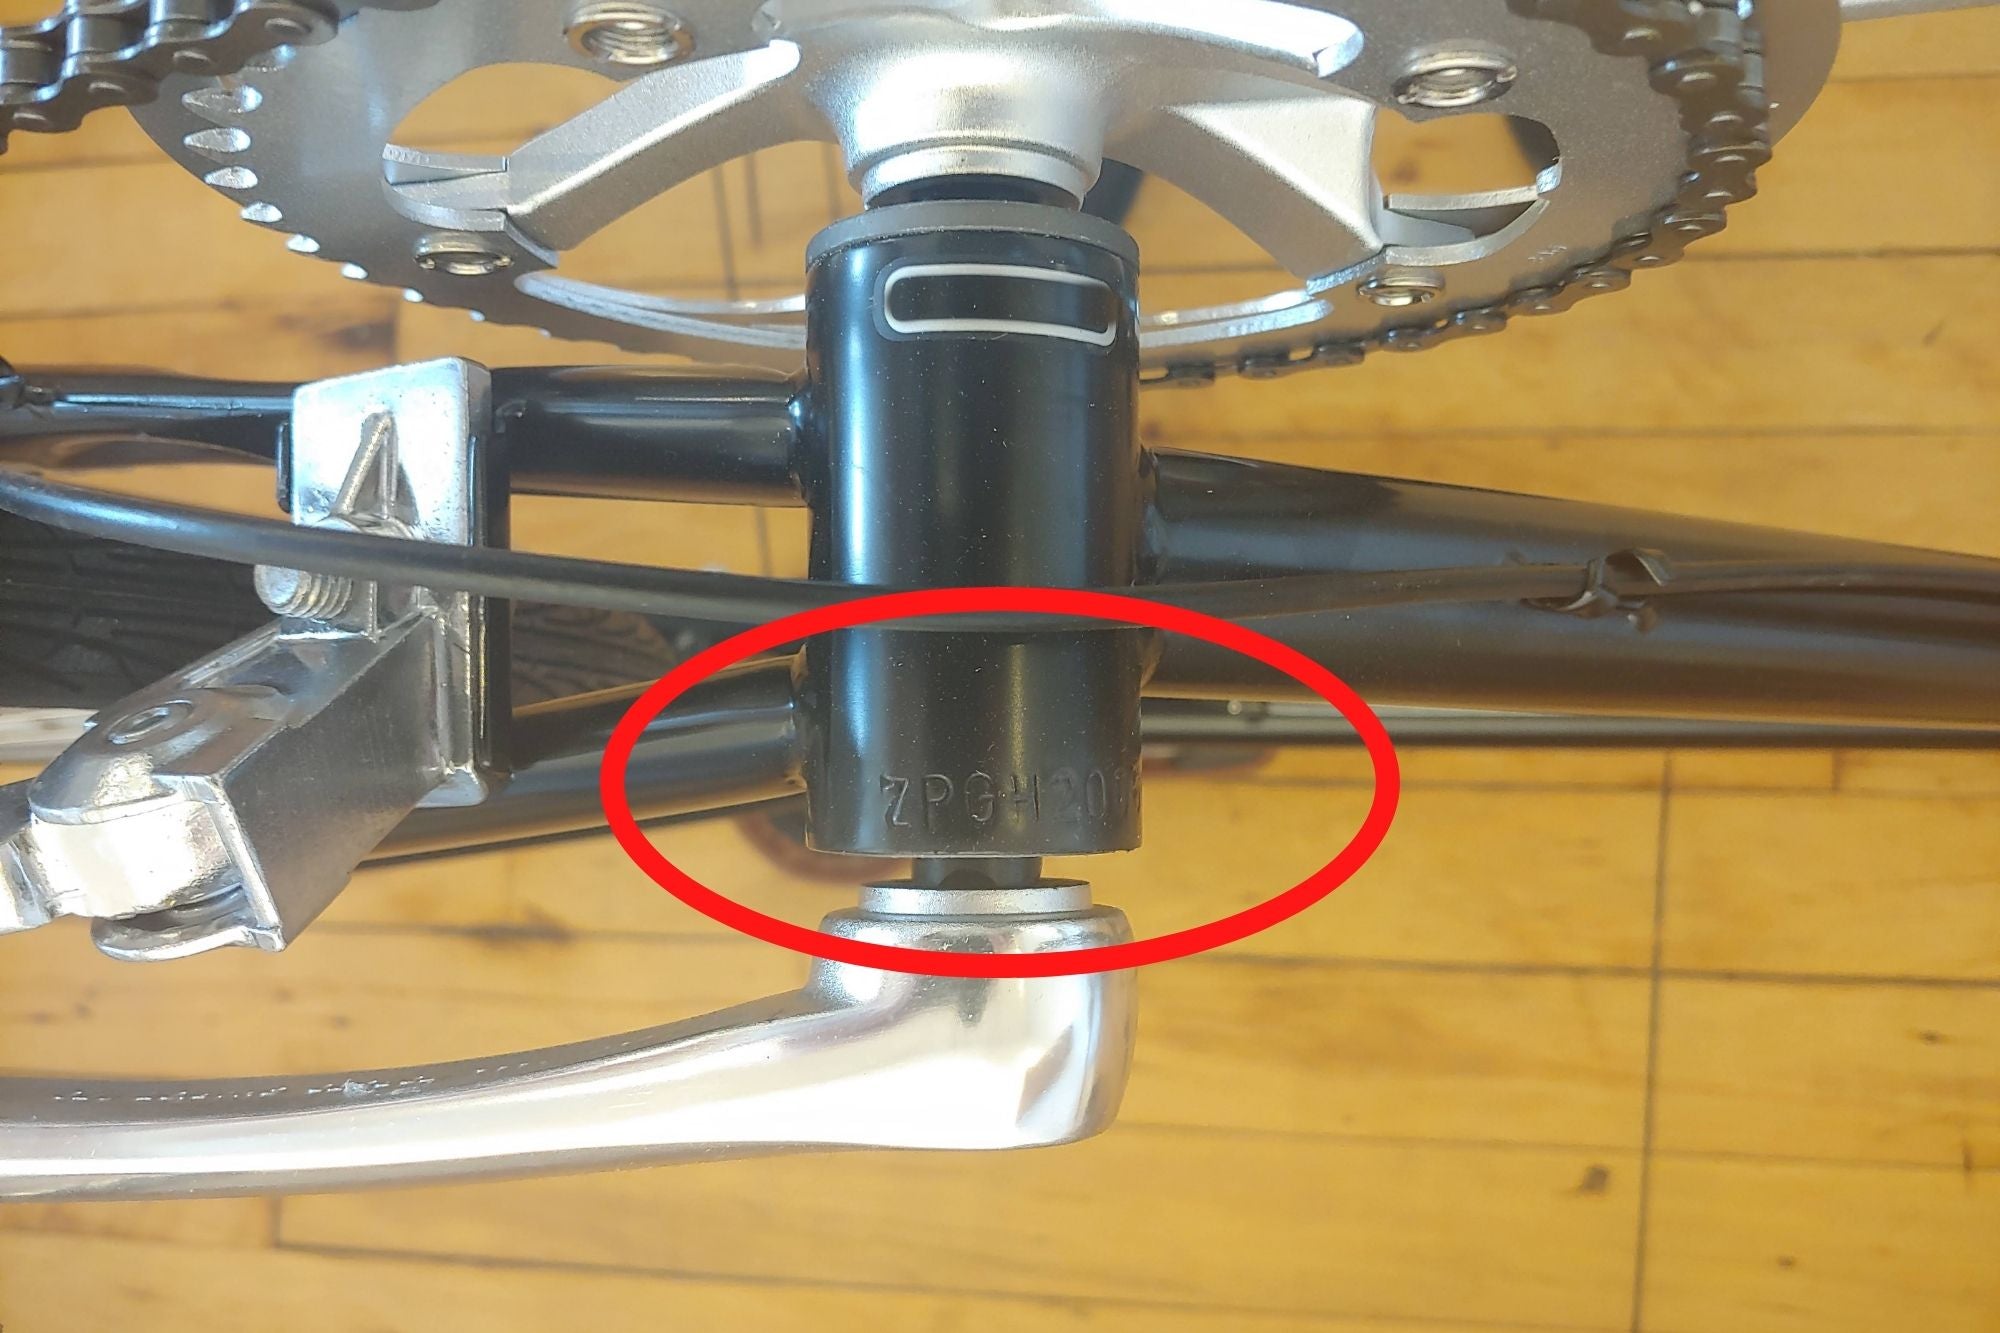 How to Find Your Bike's Serial Number